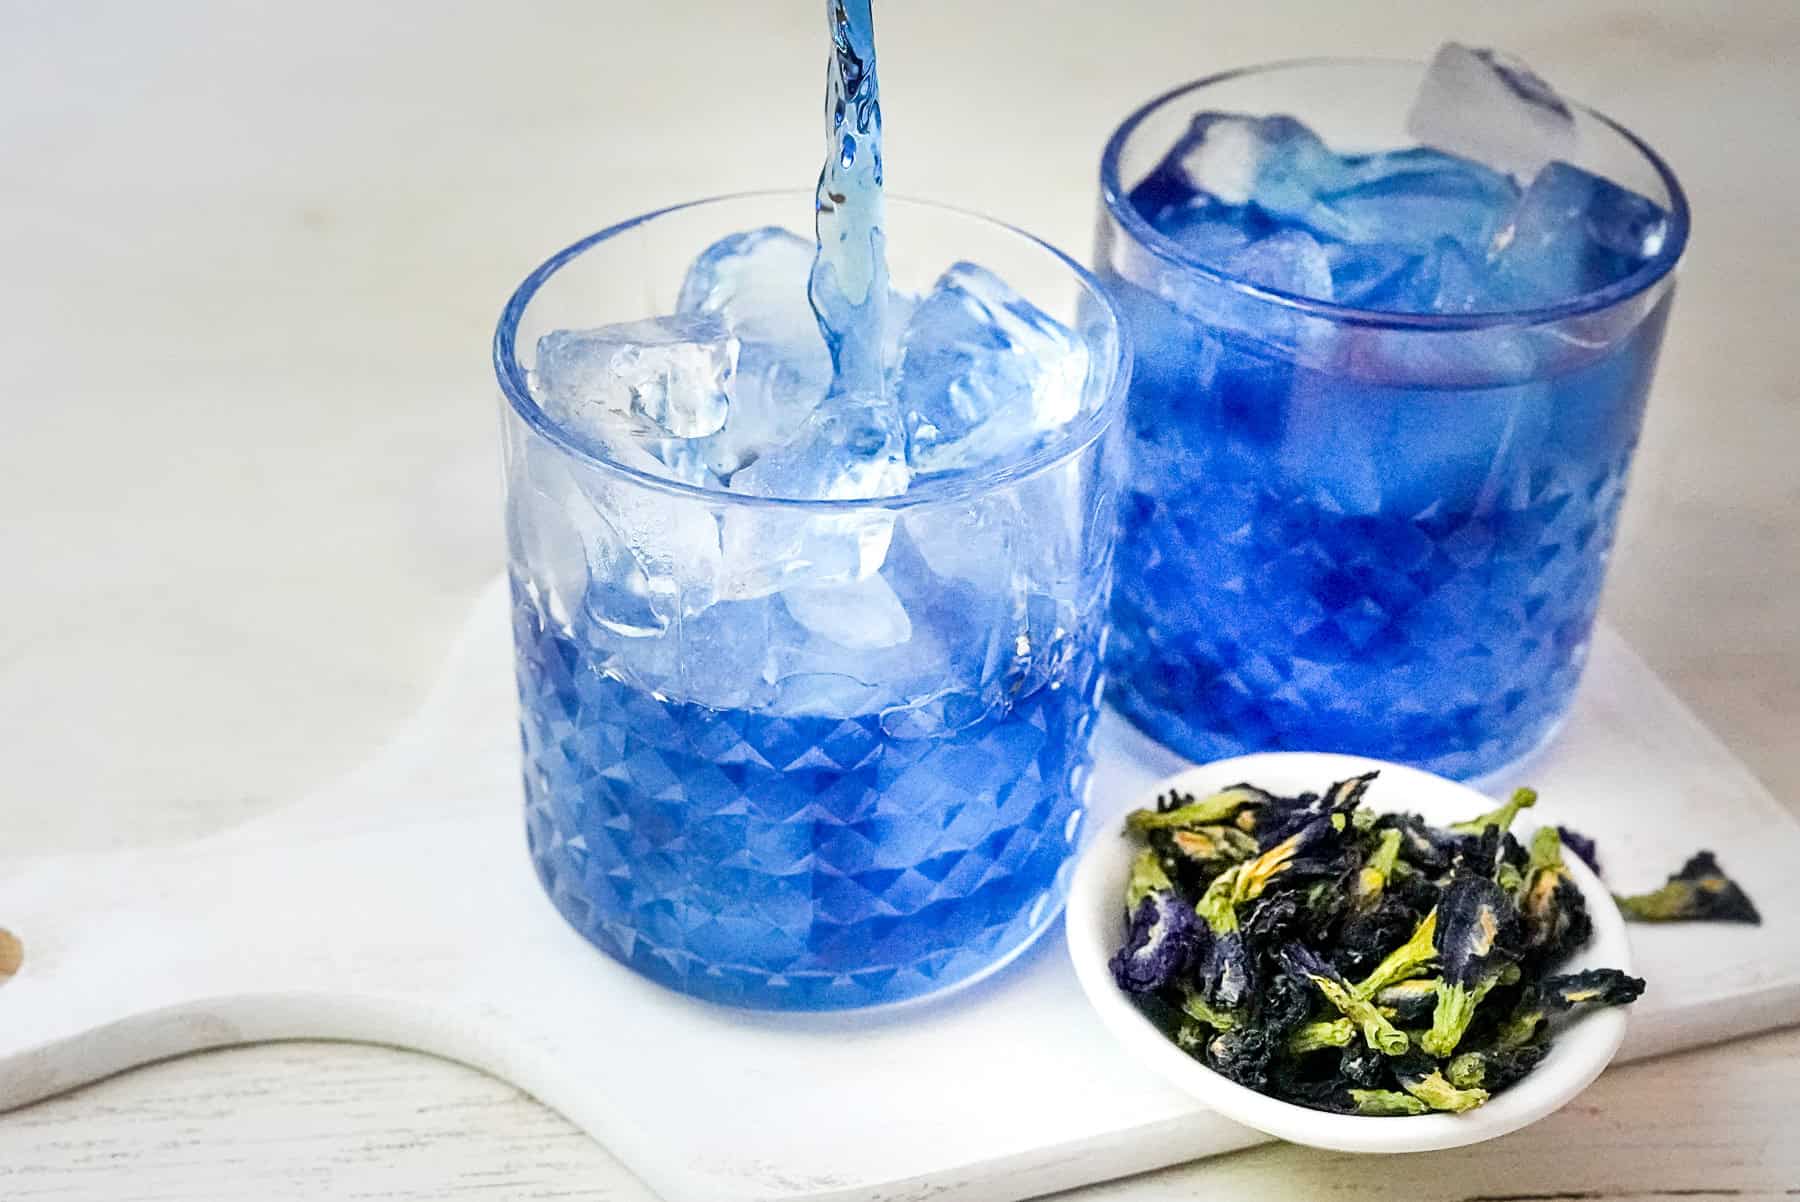 Pour butterfly pea tea into glass with ice